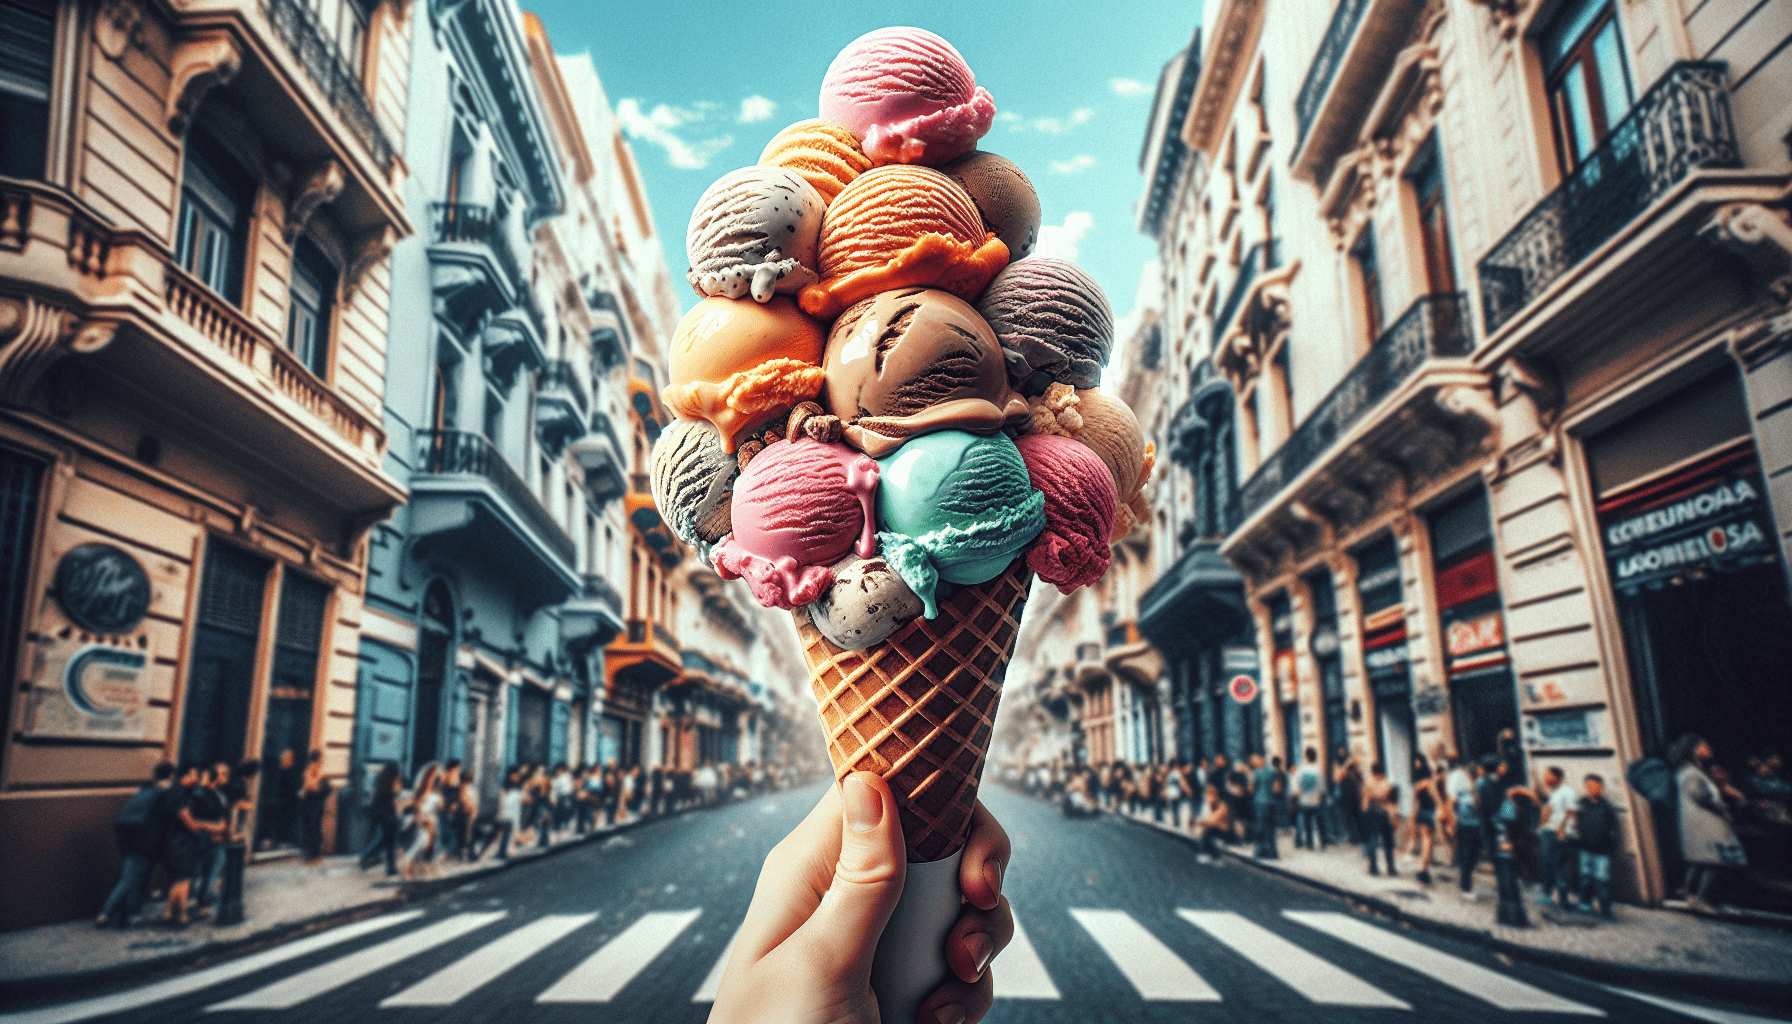 Where to Find the Best Ice Cream in Buenos Aires